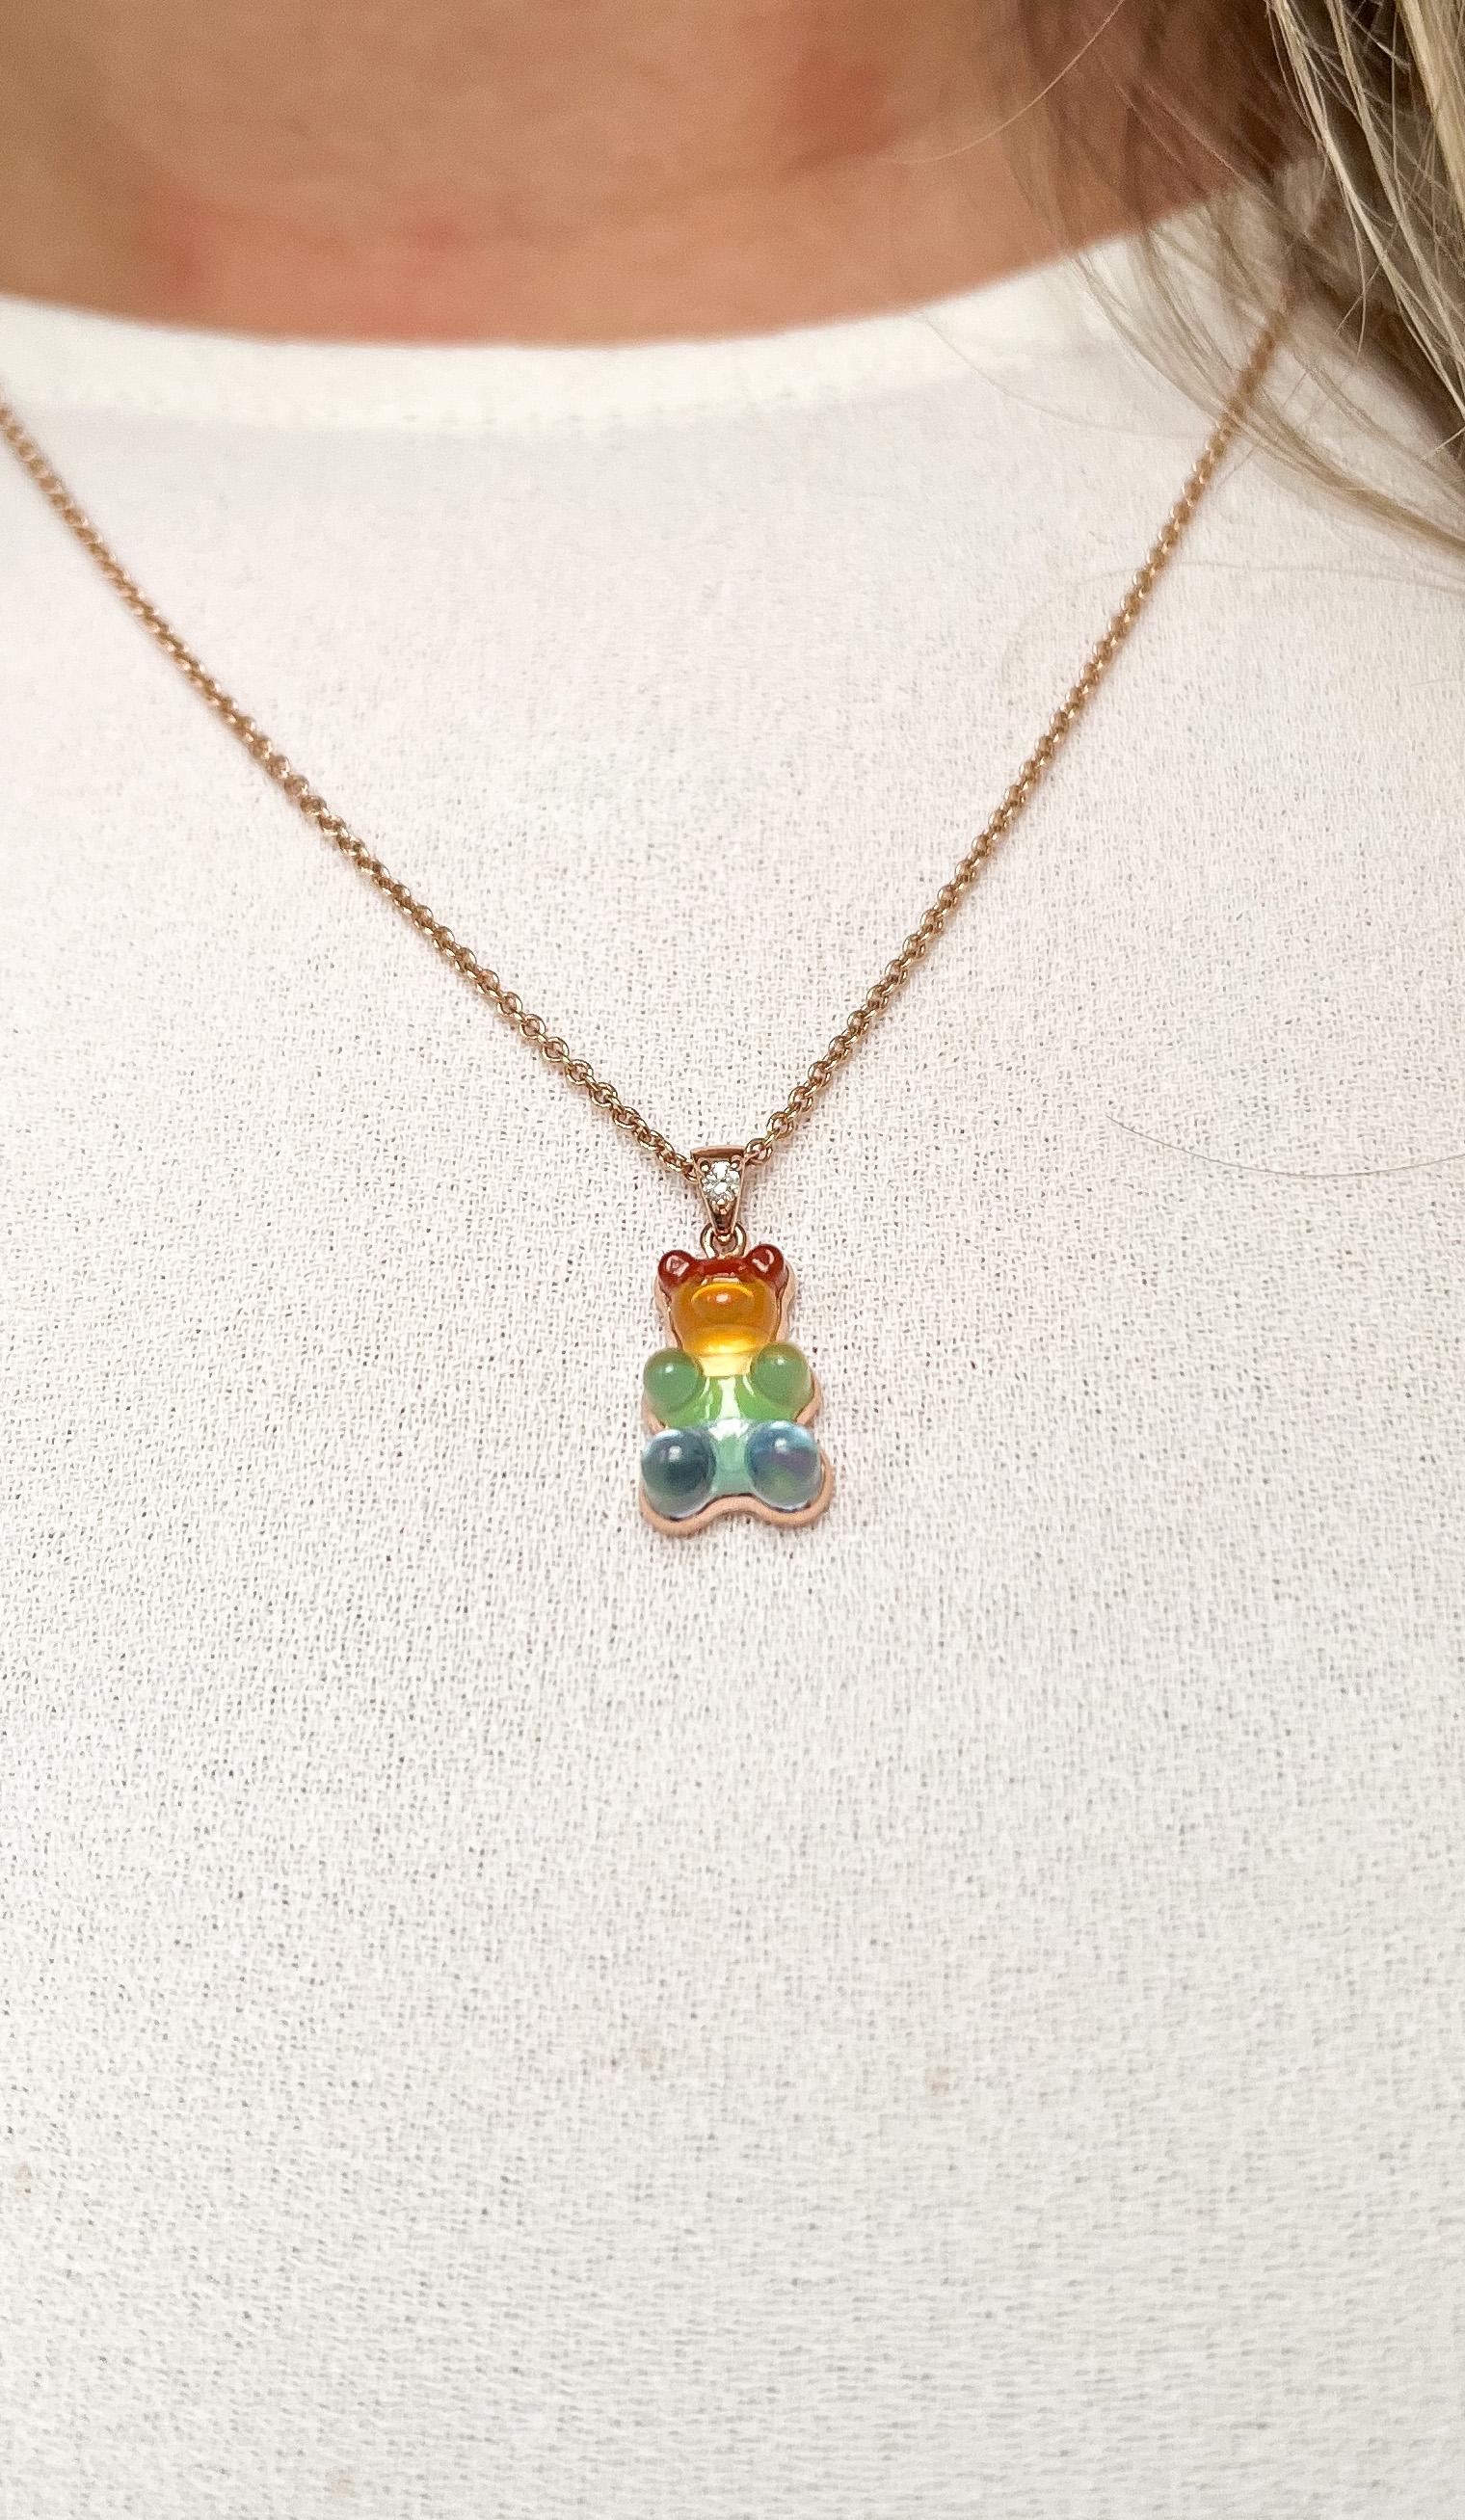 Rainbow is a bespoke kind of Gemmy Bear. This Bear brings a combination of intentions of all stones below. A great cocktail!

Stone: carnelian - fanta opal - yellow opal - chrysoprase - topaz - amethyst
Provenance stone: varies
Size bear: 8,5mm